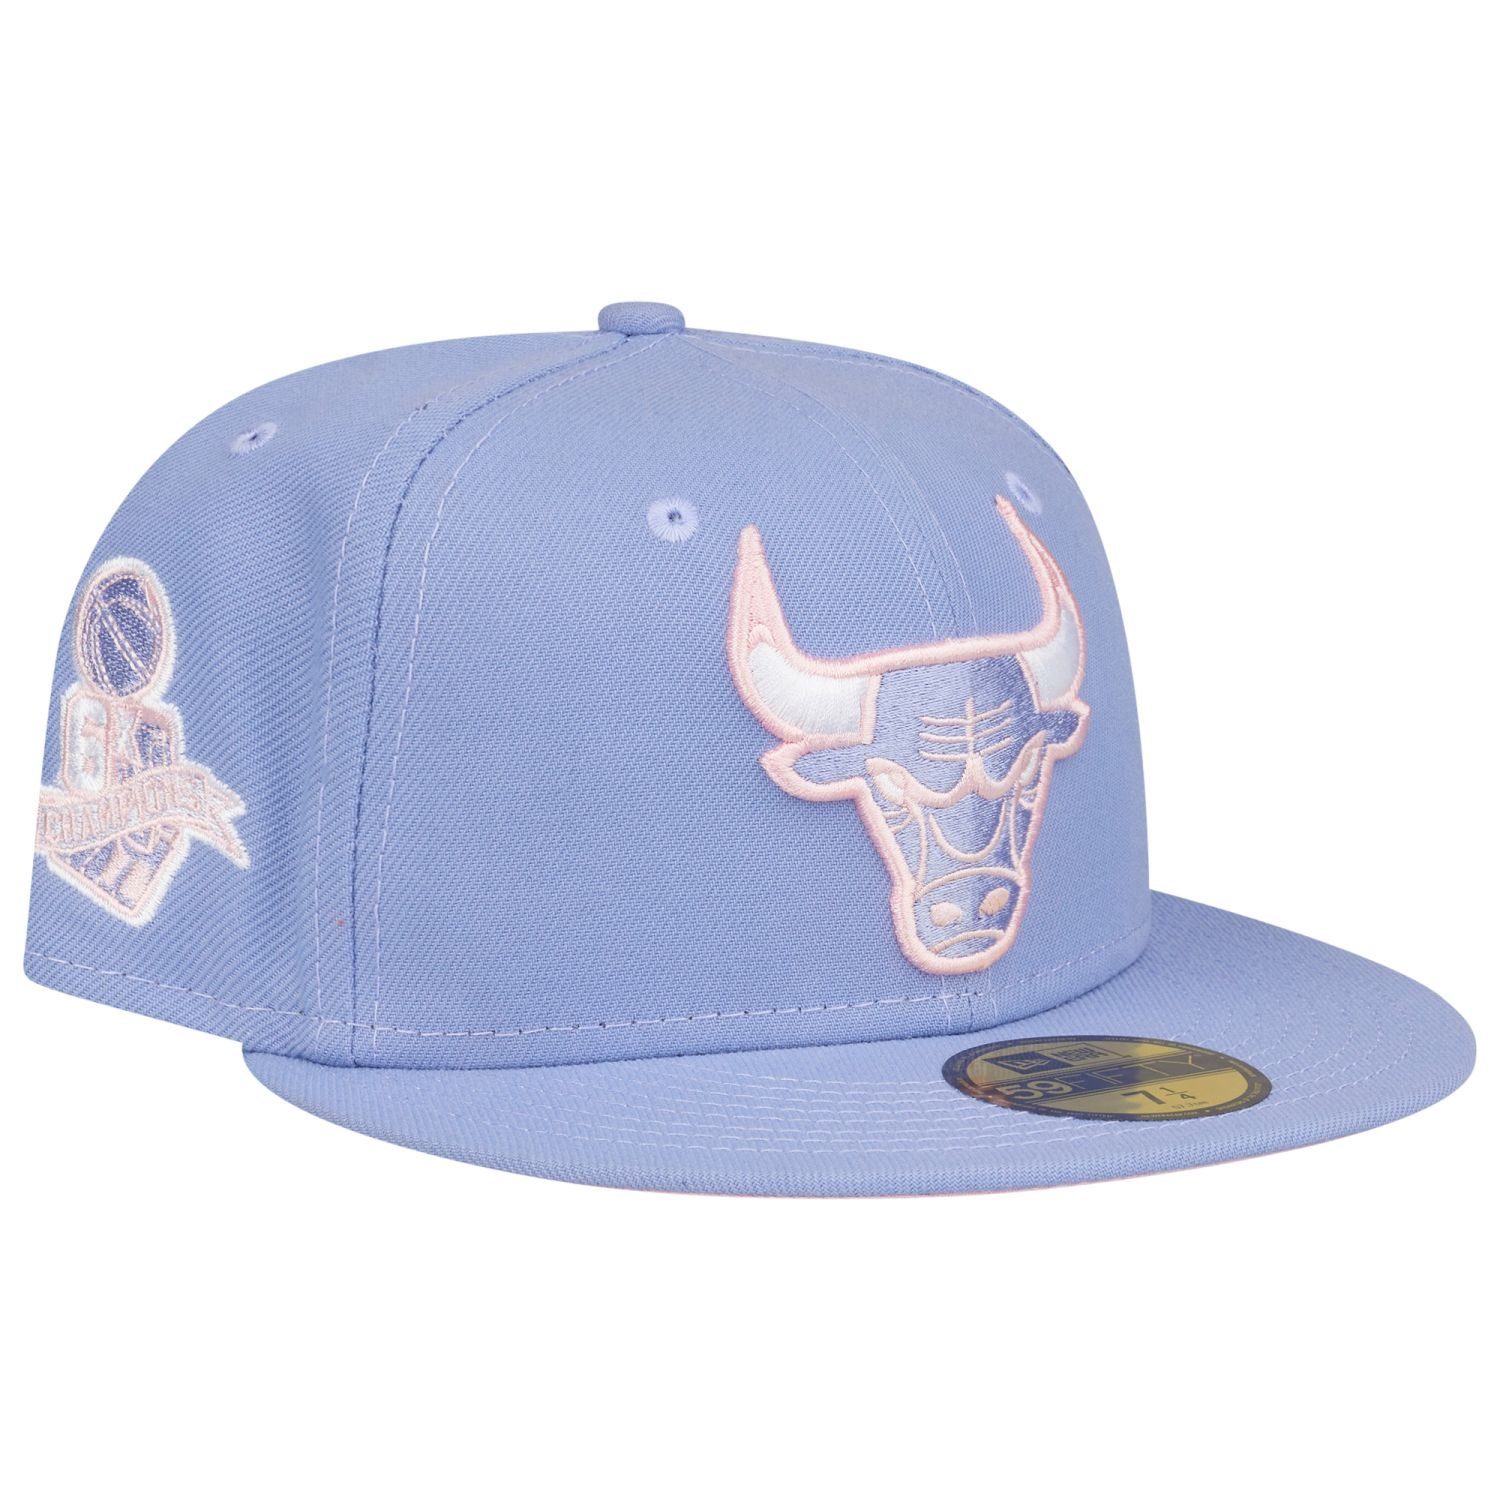 New Era Fitted Cap 59Fifty Chicago Bulls lavendel